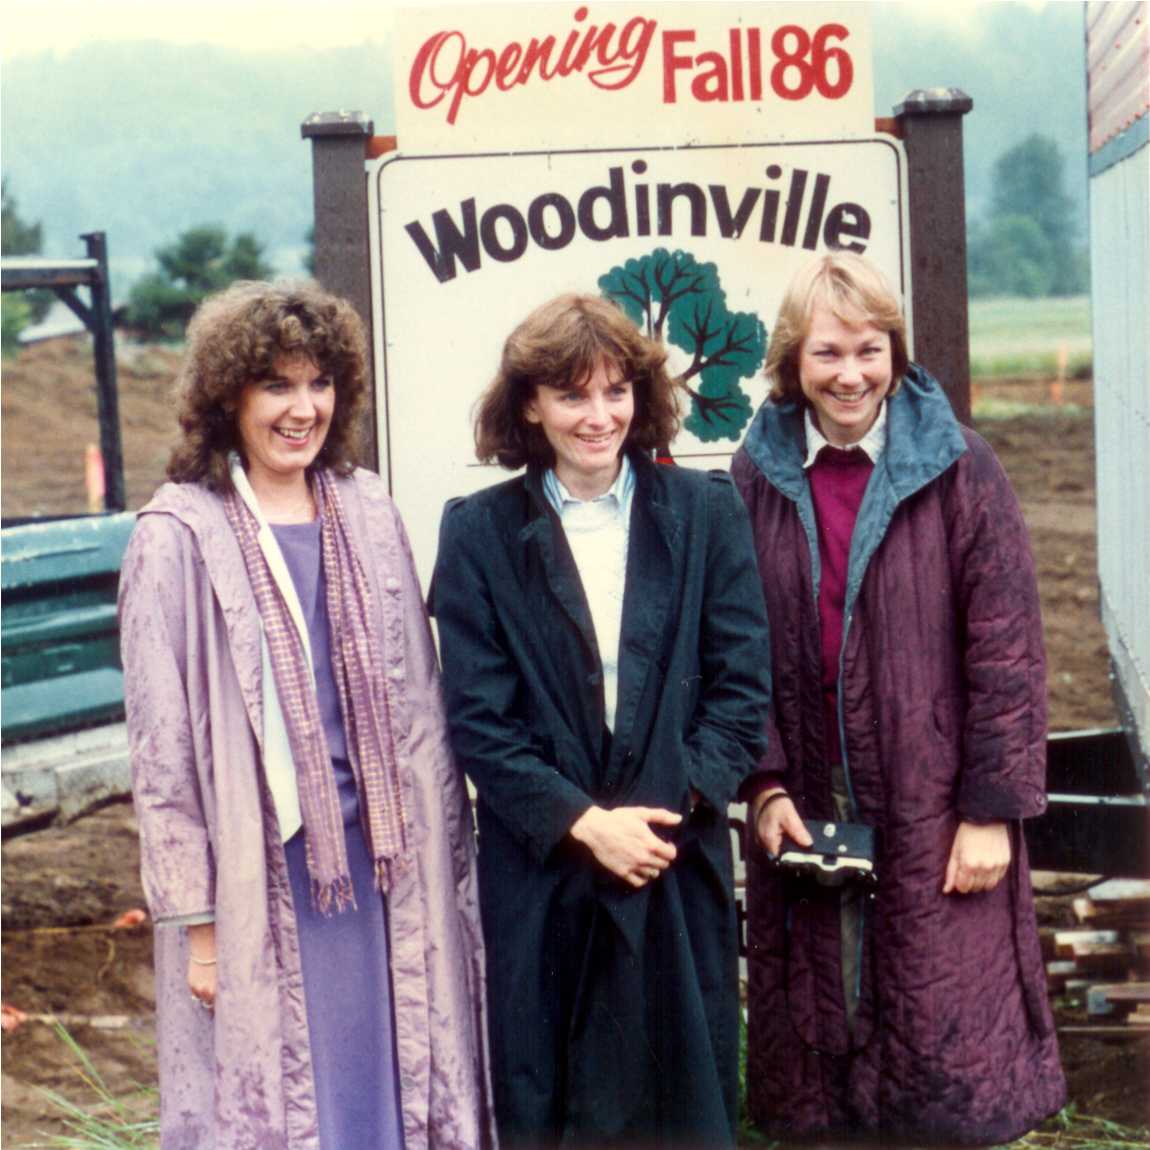 WMS founders breaking ground for Woodinville Campus